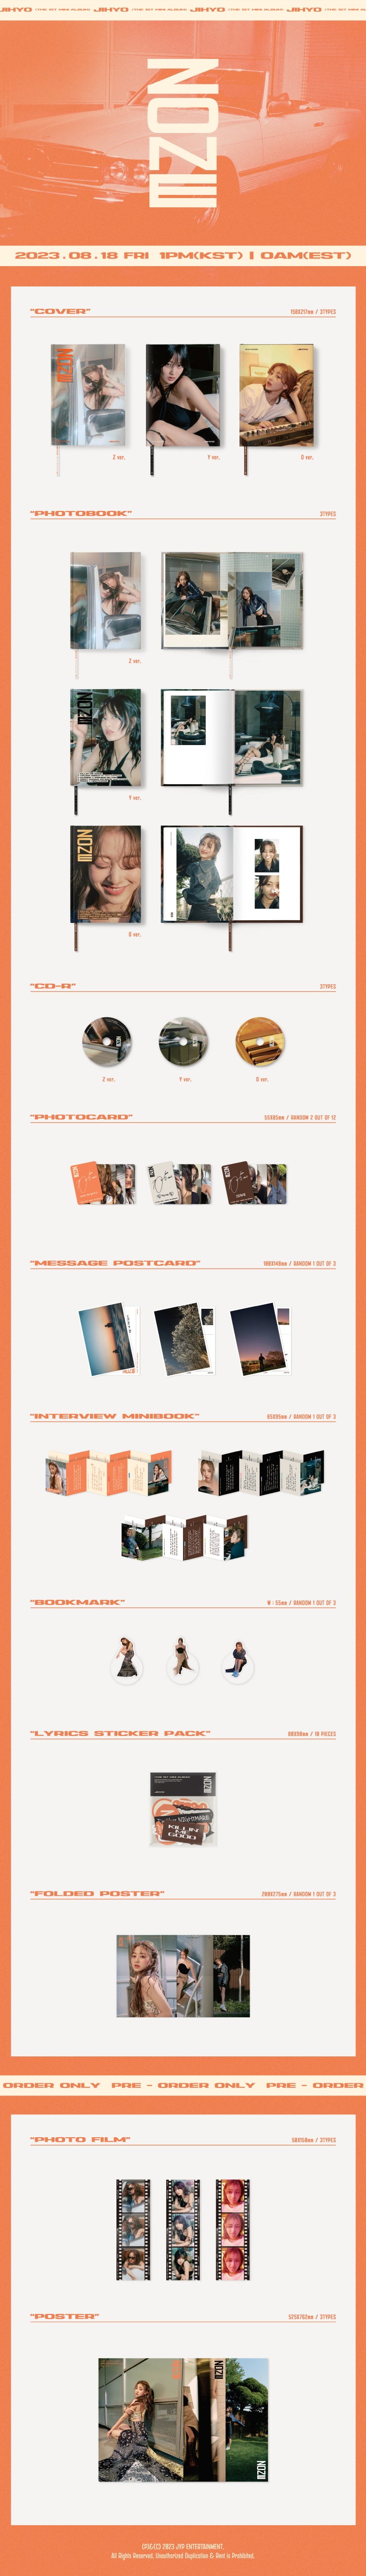 1 CD
1 Photo Book
2 Photo Cards (random out of 12 types)
1 Message Postcard (random out of 3 types)
1 Interview Mini Book ...